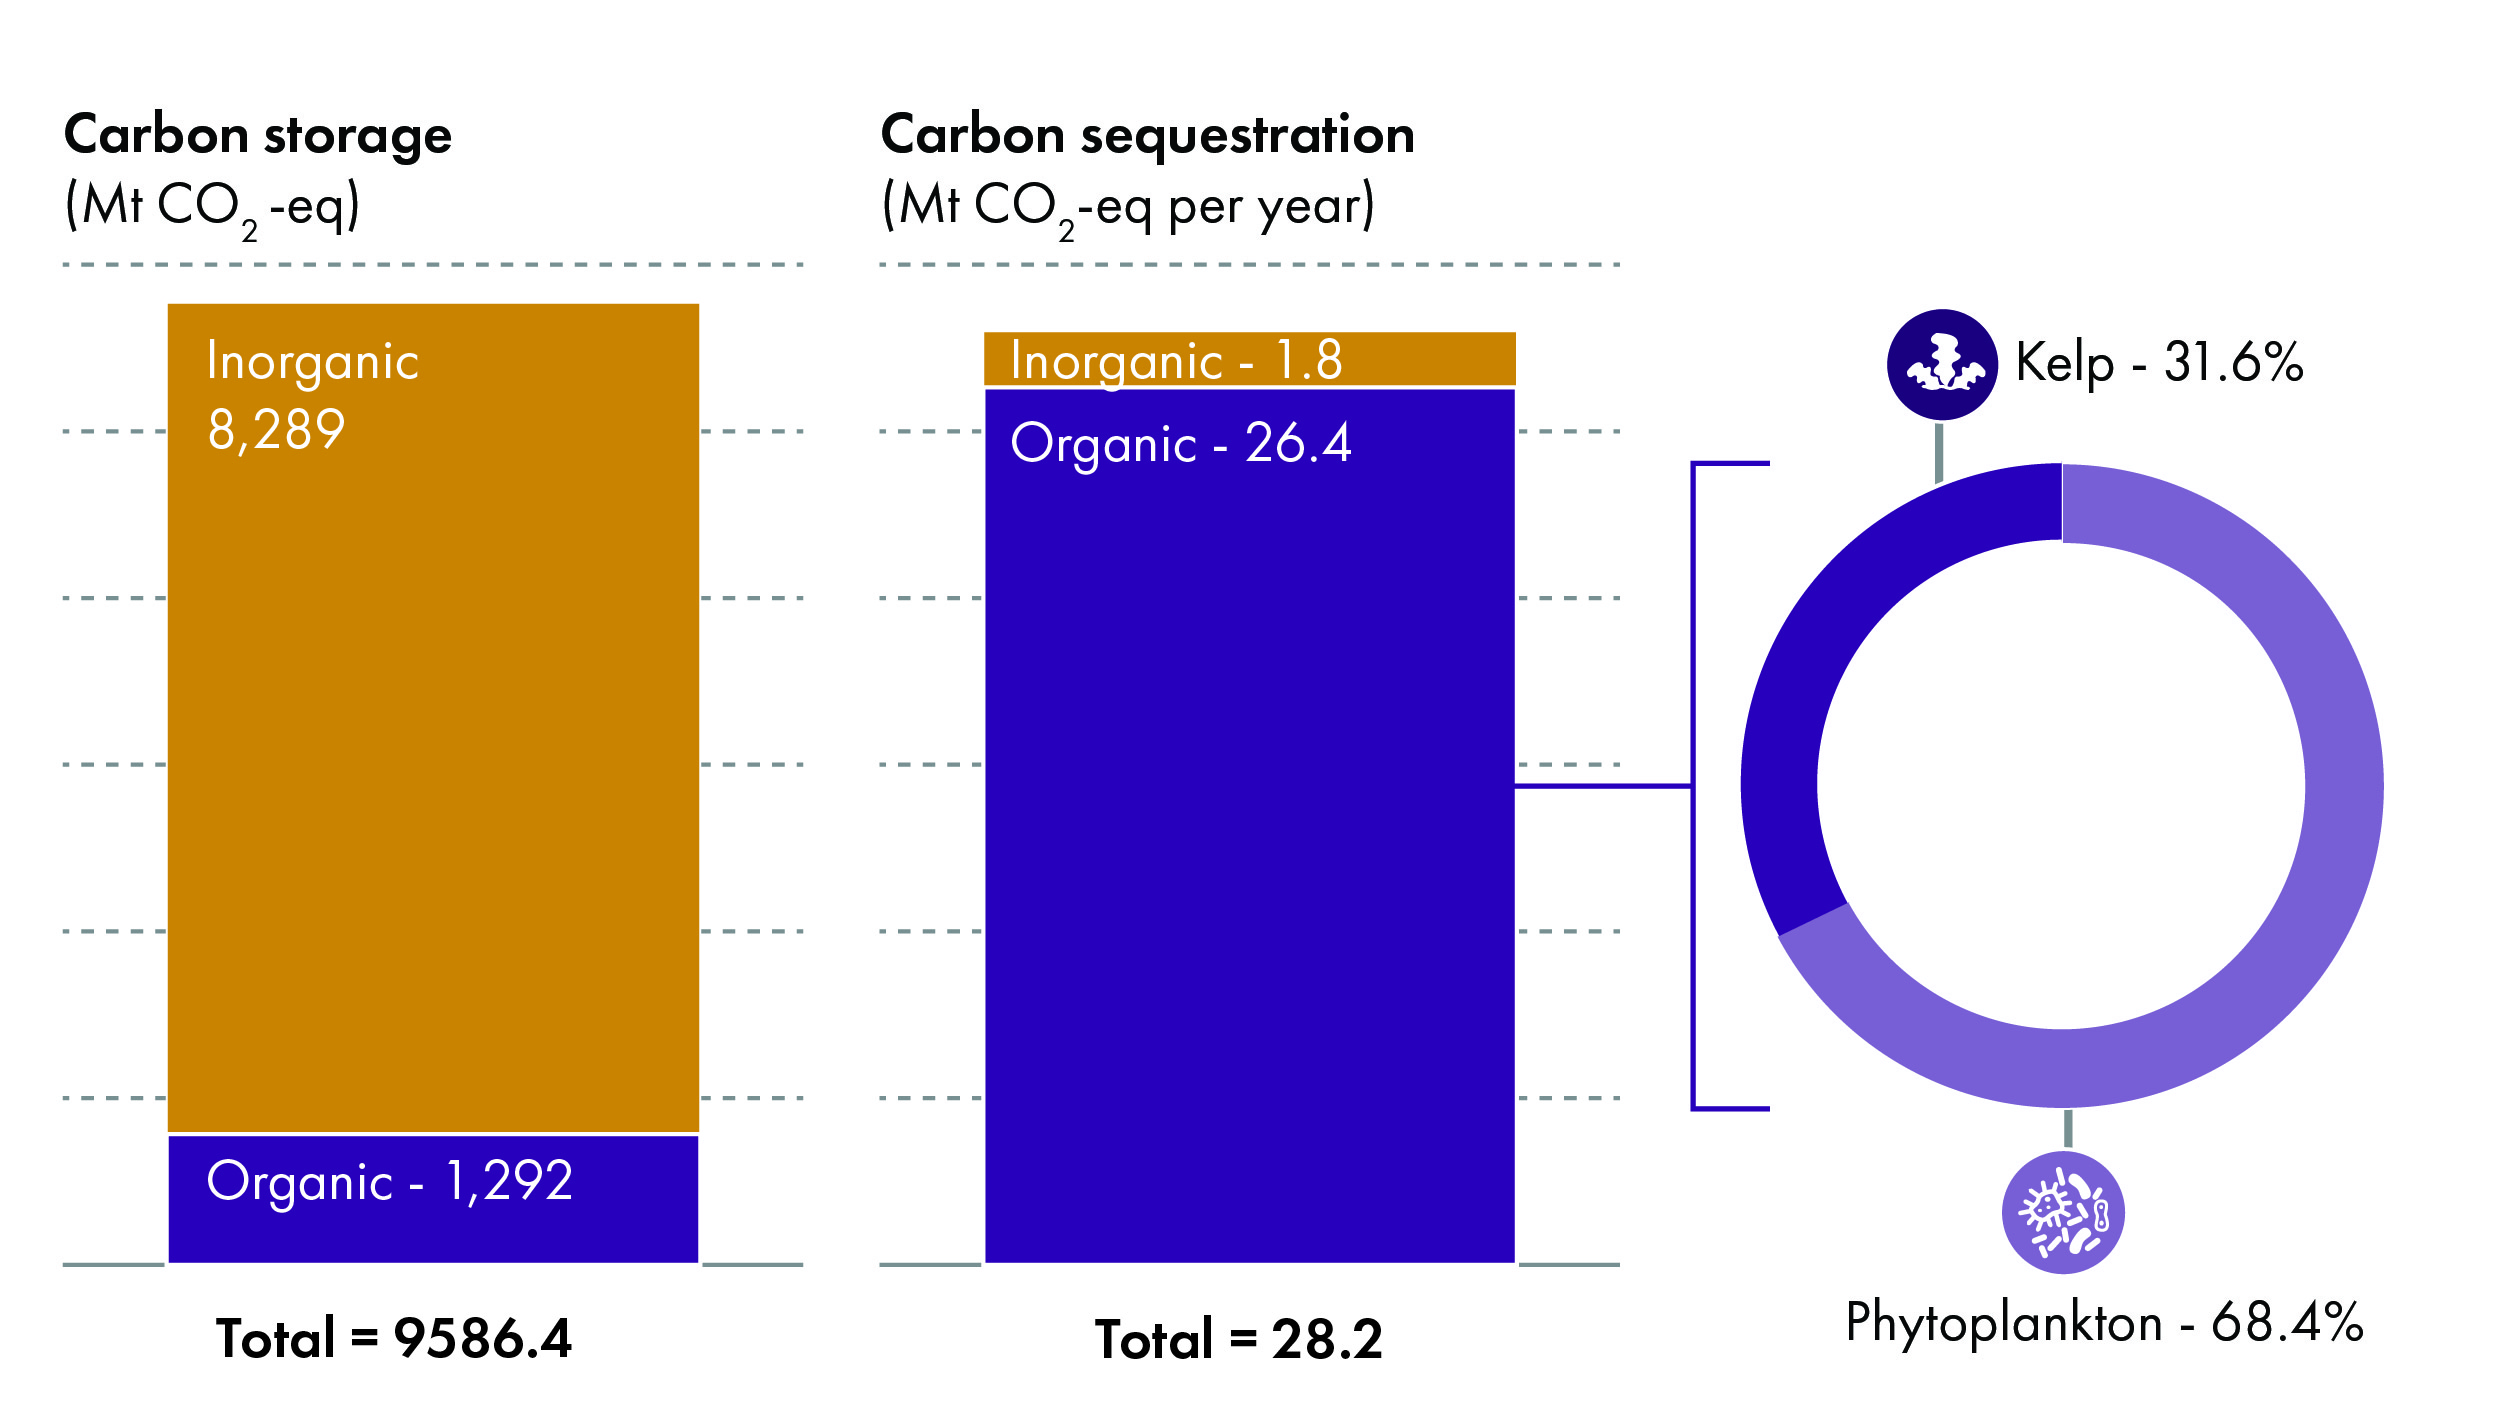 Bar graphs showing the contribution of inorganic carbon and organic carbon to seafloor sediment carbon storage and carbon sequestration. Pie chart of the proportion of organic carbon sequestration that is kelp derived (31.6%) and phytoplankton derived (68.4%).